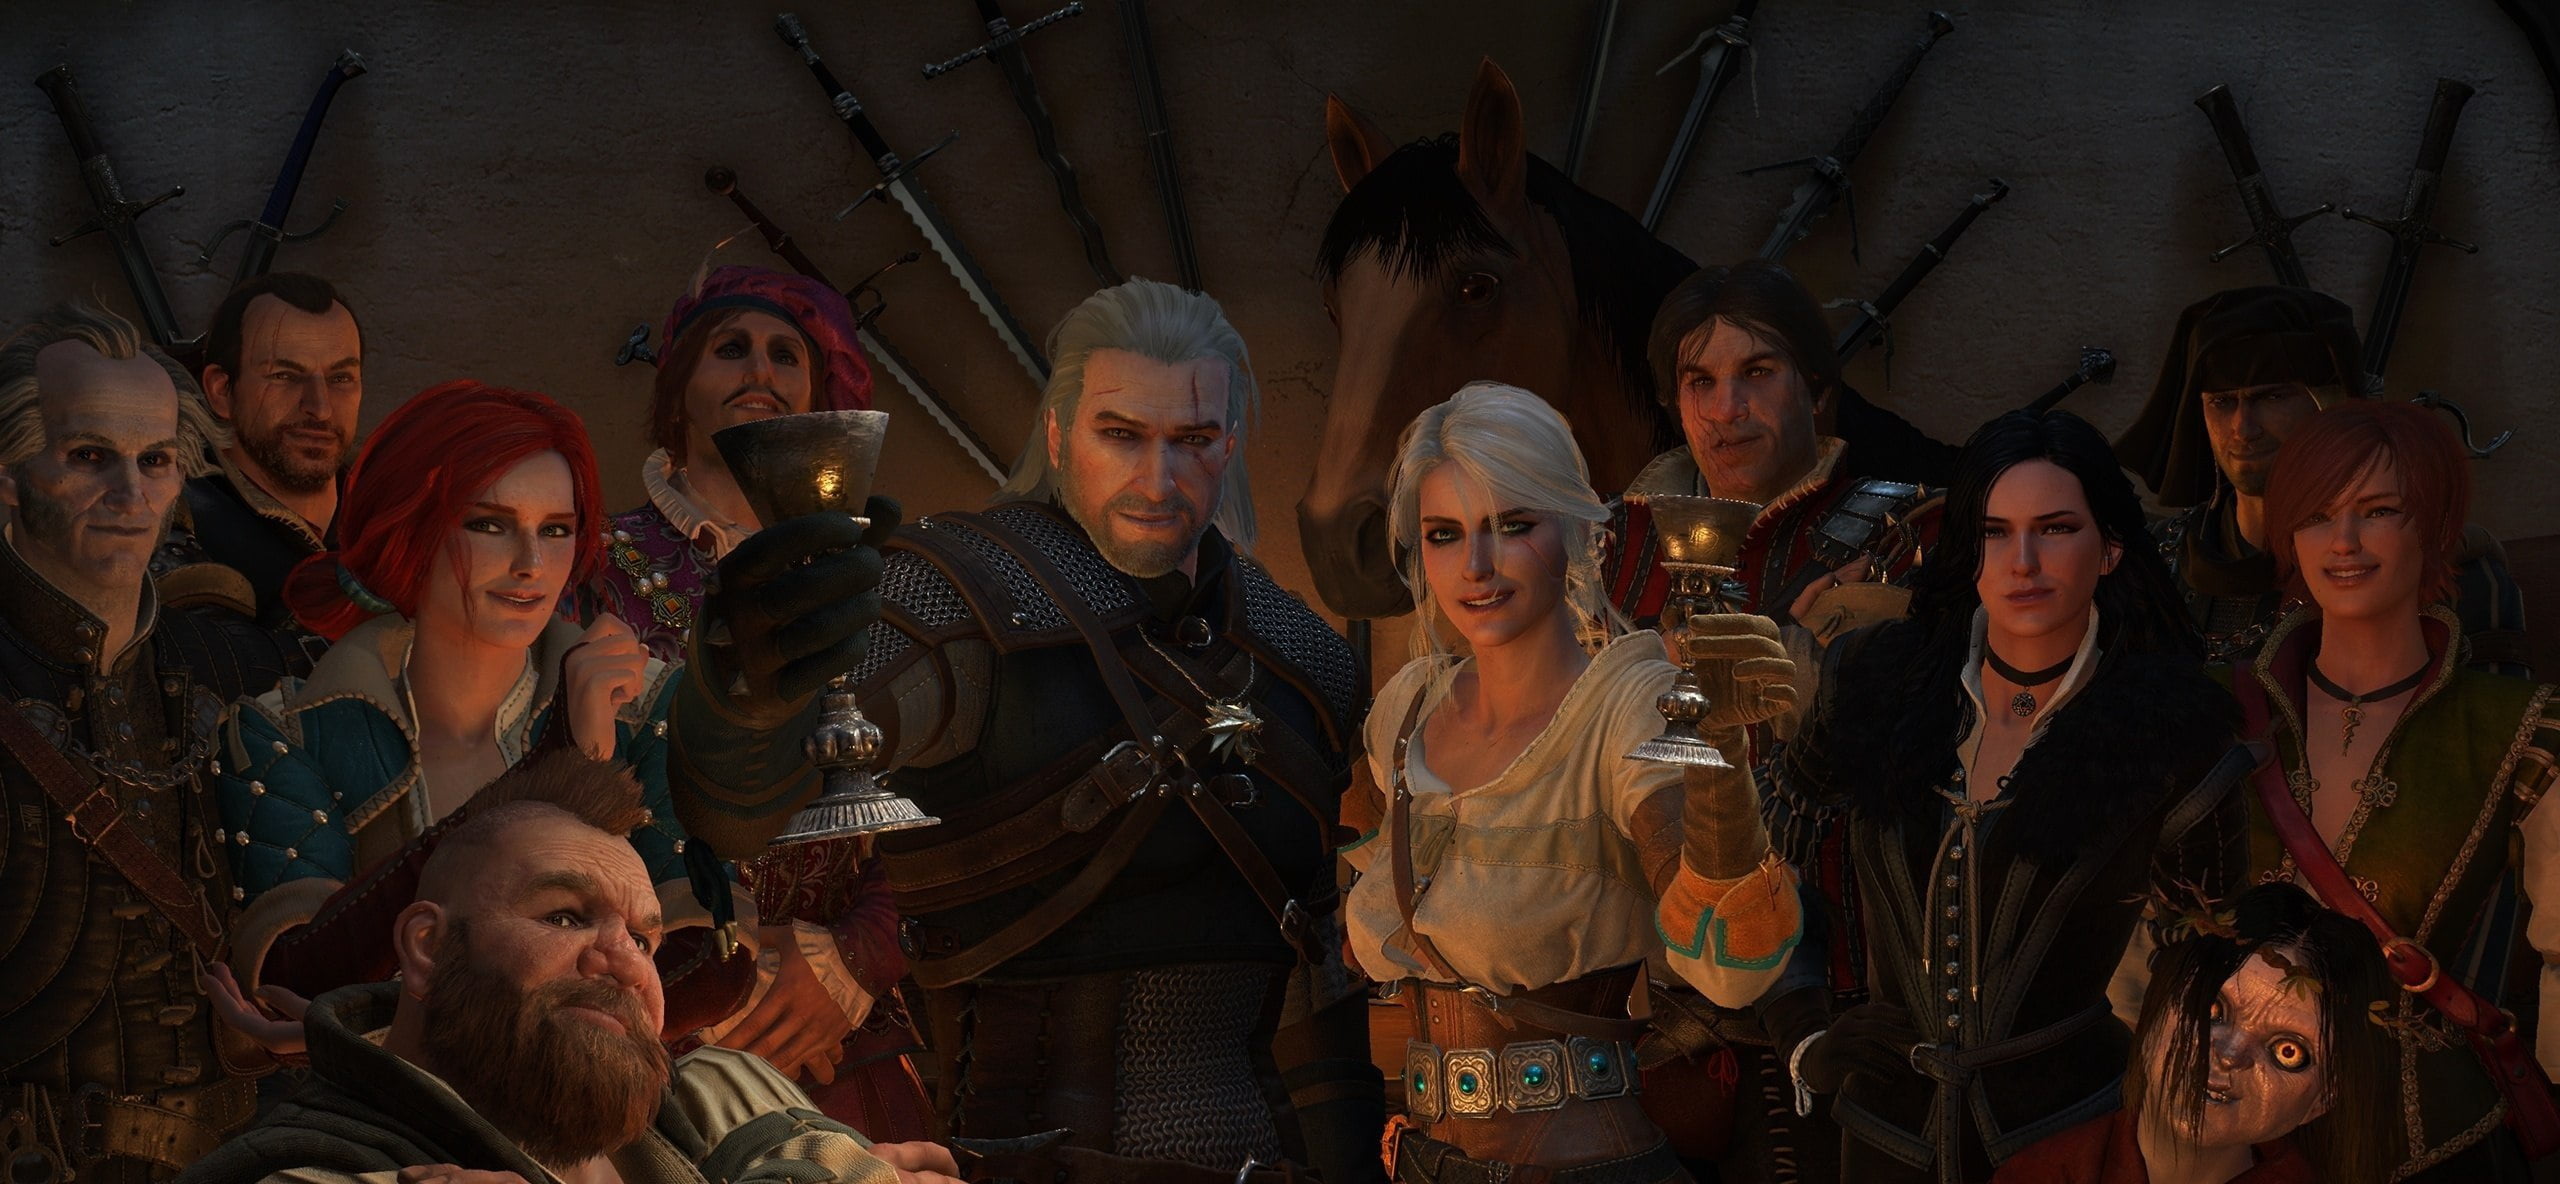 brass-colored goblets, The Witcher, Geralt, CD Projekt RED, The Witcher 3: Wild Hunt